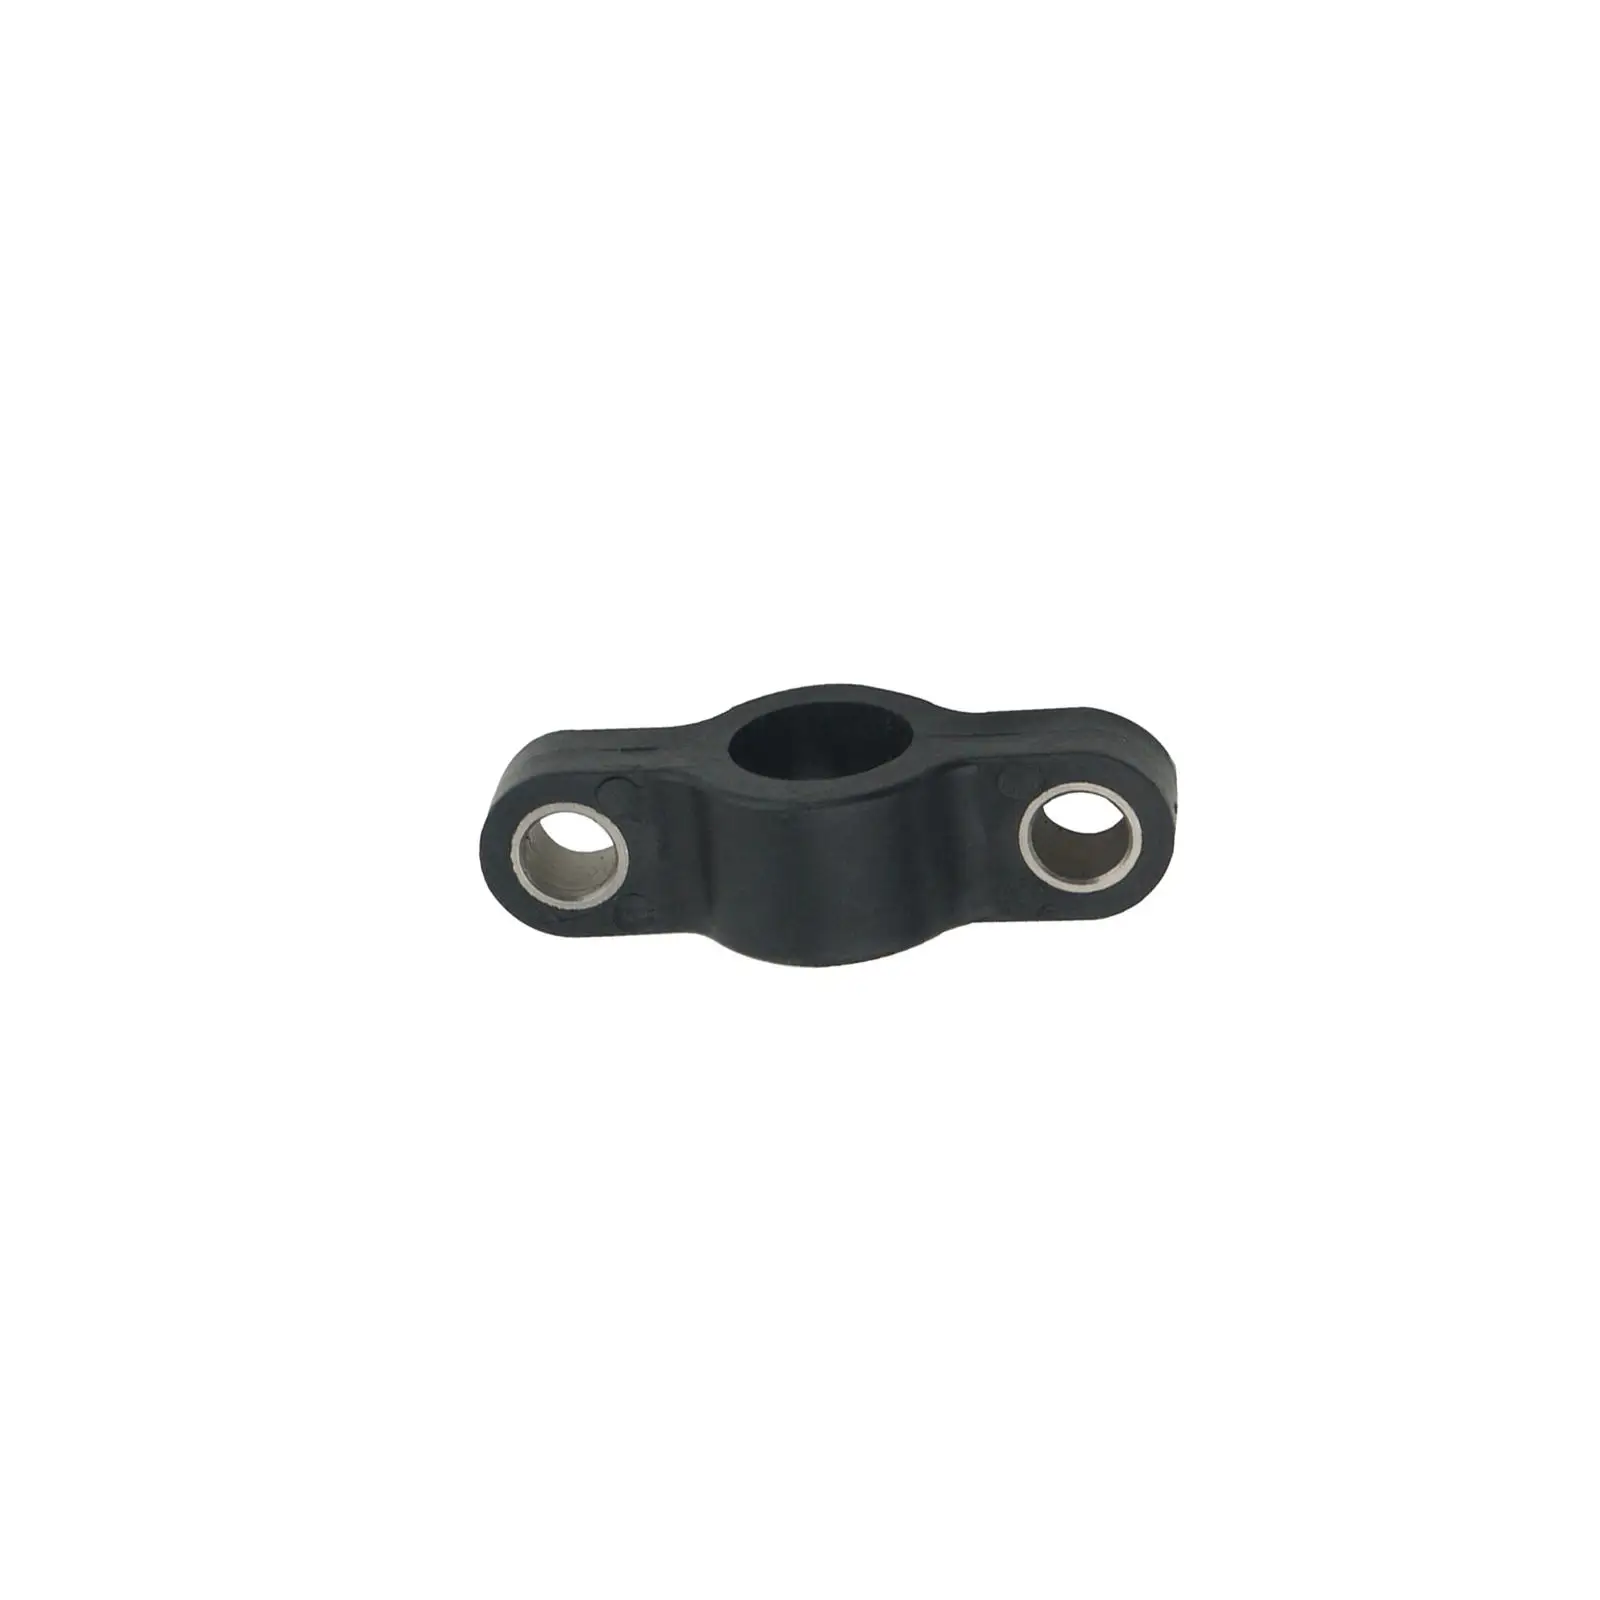 Bracket F15-05040002 for Parsun Engine Easily Install Boat Repairing Accessory